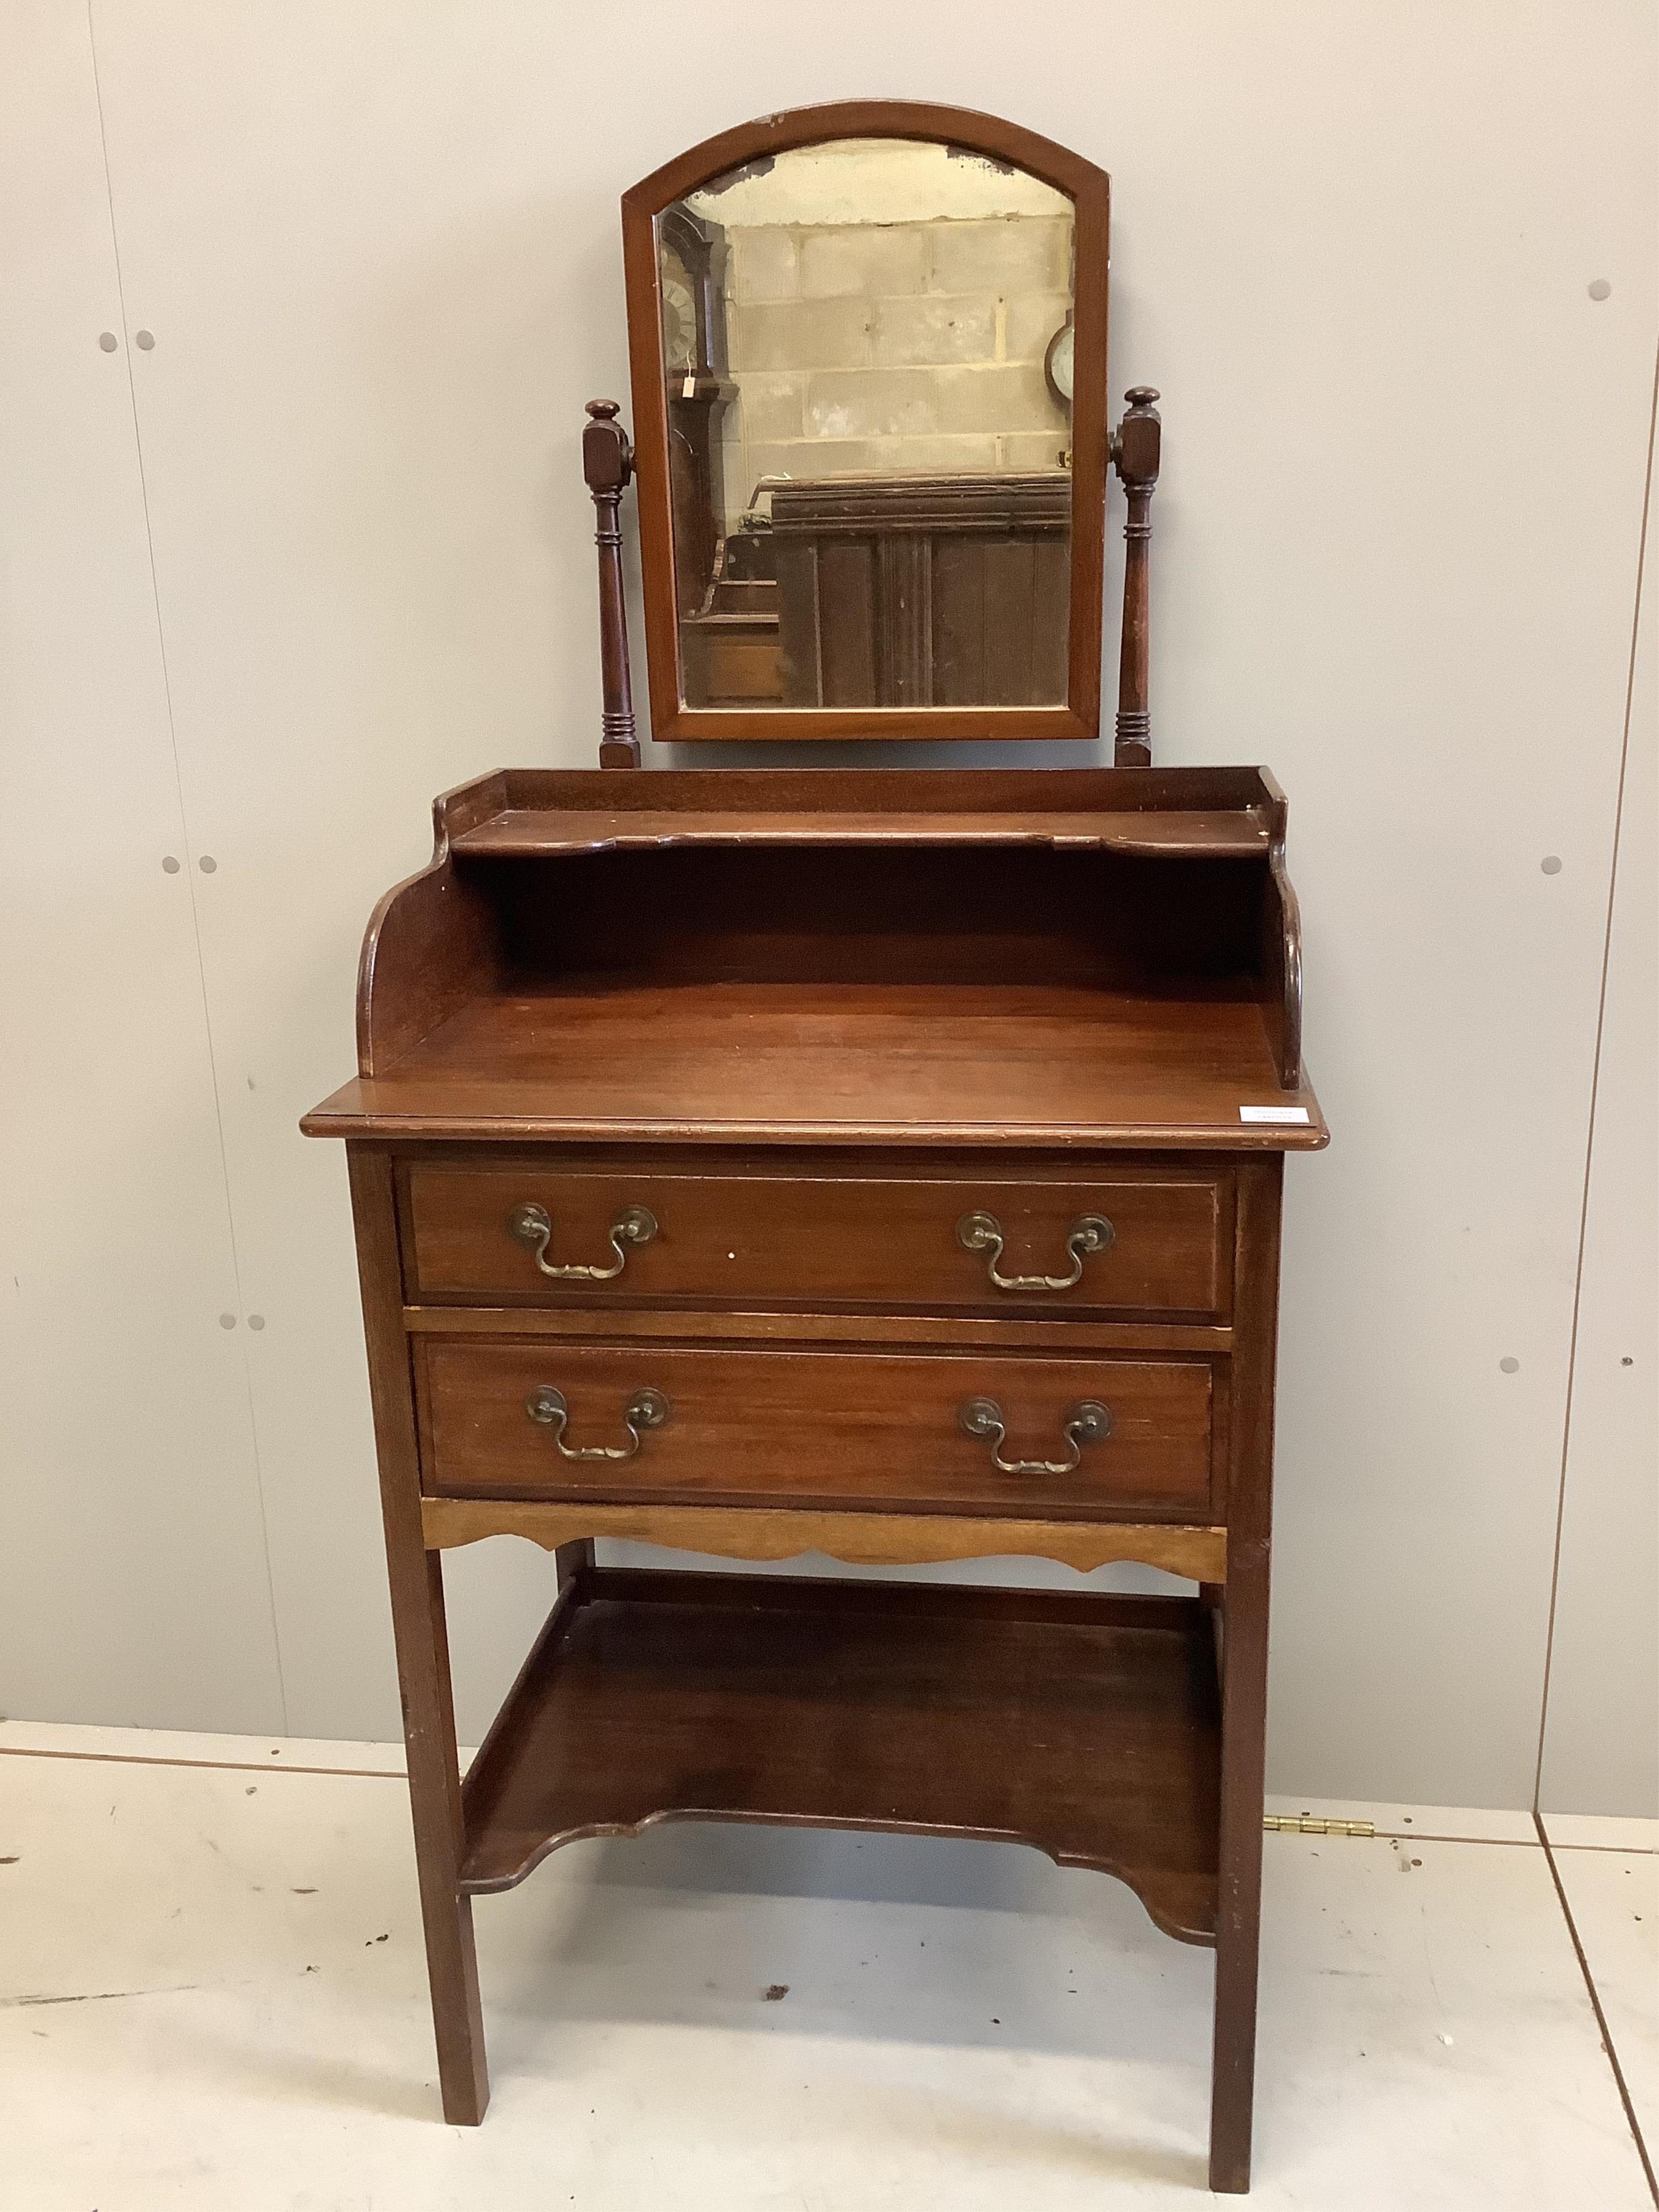 An Edwardian mahogany washstand, with mirror over, width 68cm, depth 45cm, height 144cm. Condition - fair